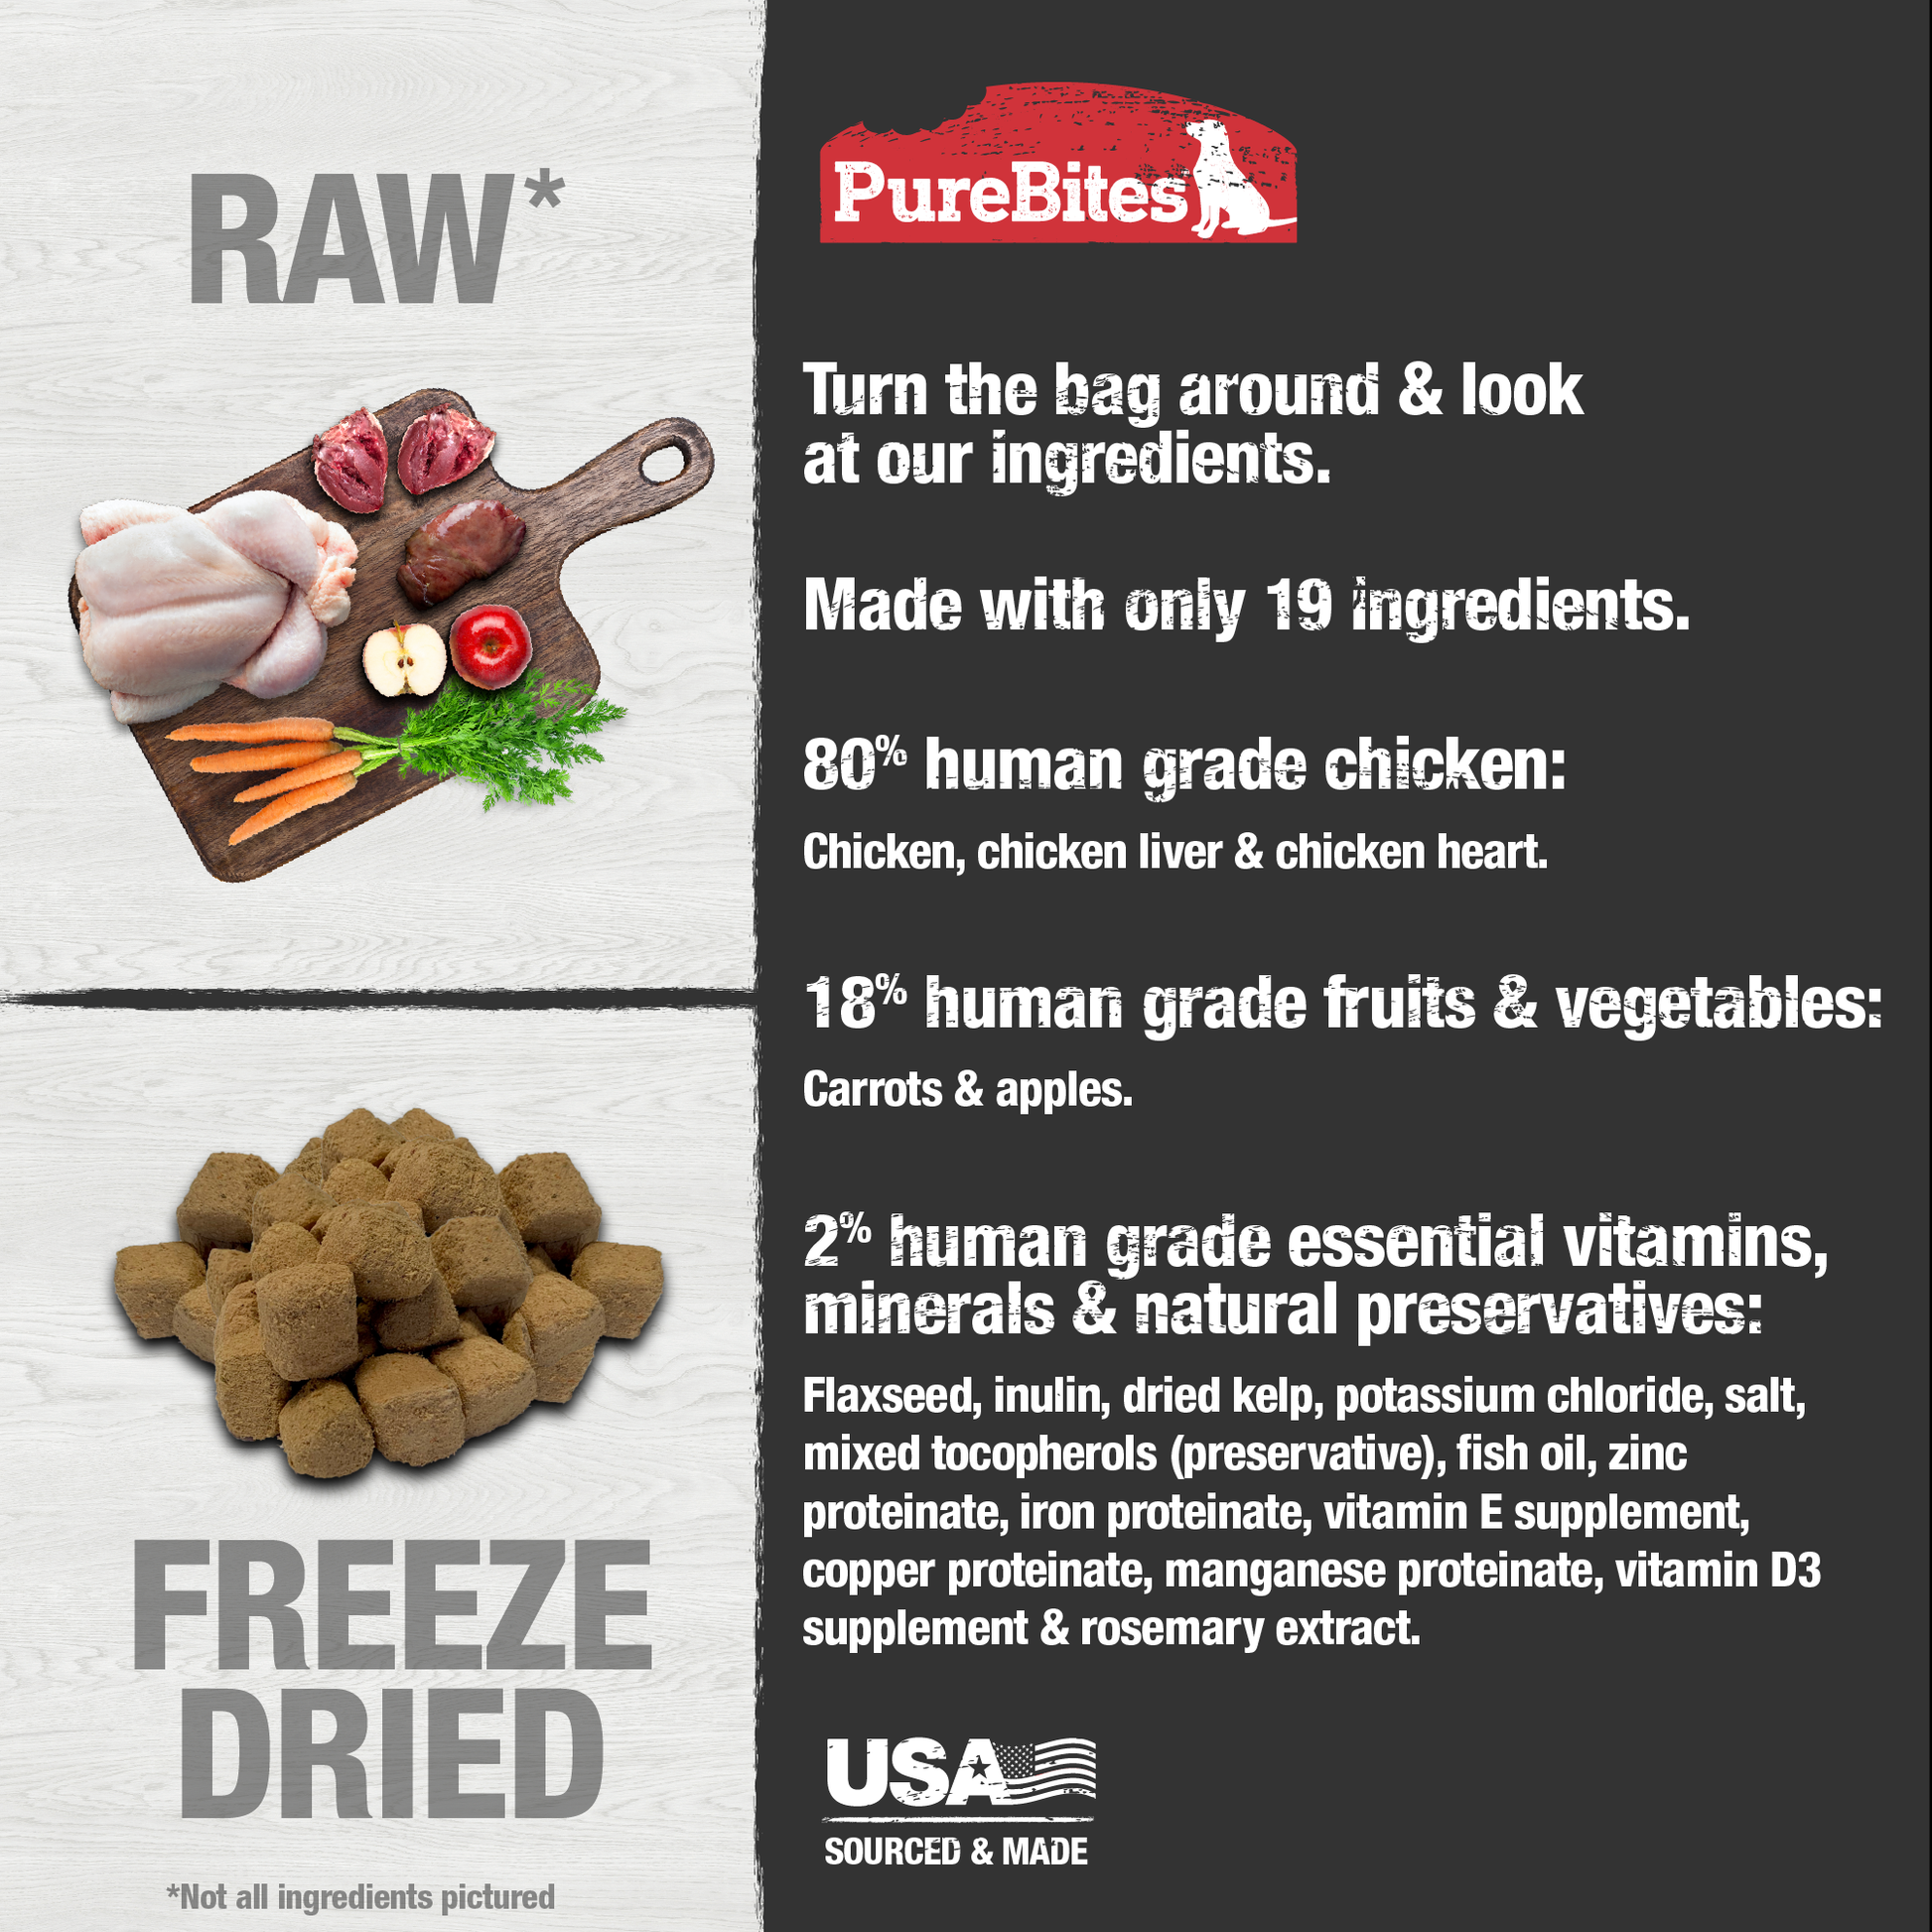 Made with only 19 Ingredients you can read, pronounce, and trust: USA sourced human grade chicken, chicken liver, chicken heart, carrot, apple, flaxseed, inulin, dried kelp, potassium chloride, salt, mixed tocopherols (preservative), fish oil, zinc proteinate, iron proteinate, vitamin E supplement, copper proteinate, manganese proteinate, vitamin D3 supplement, rosemary extract.